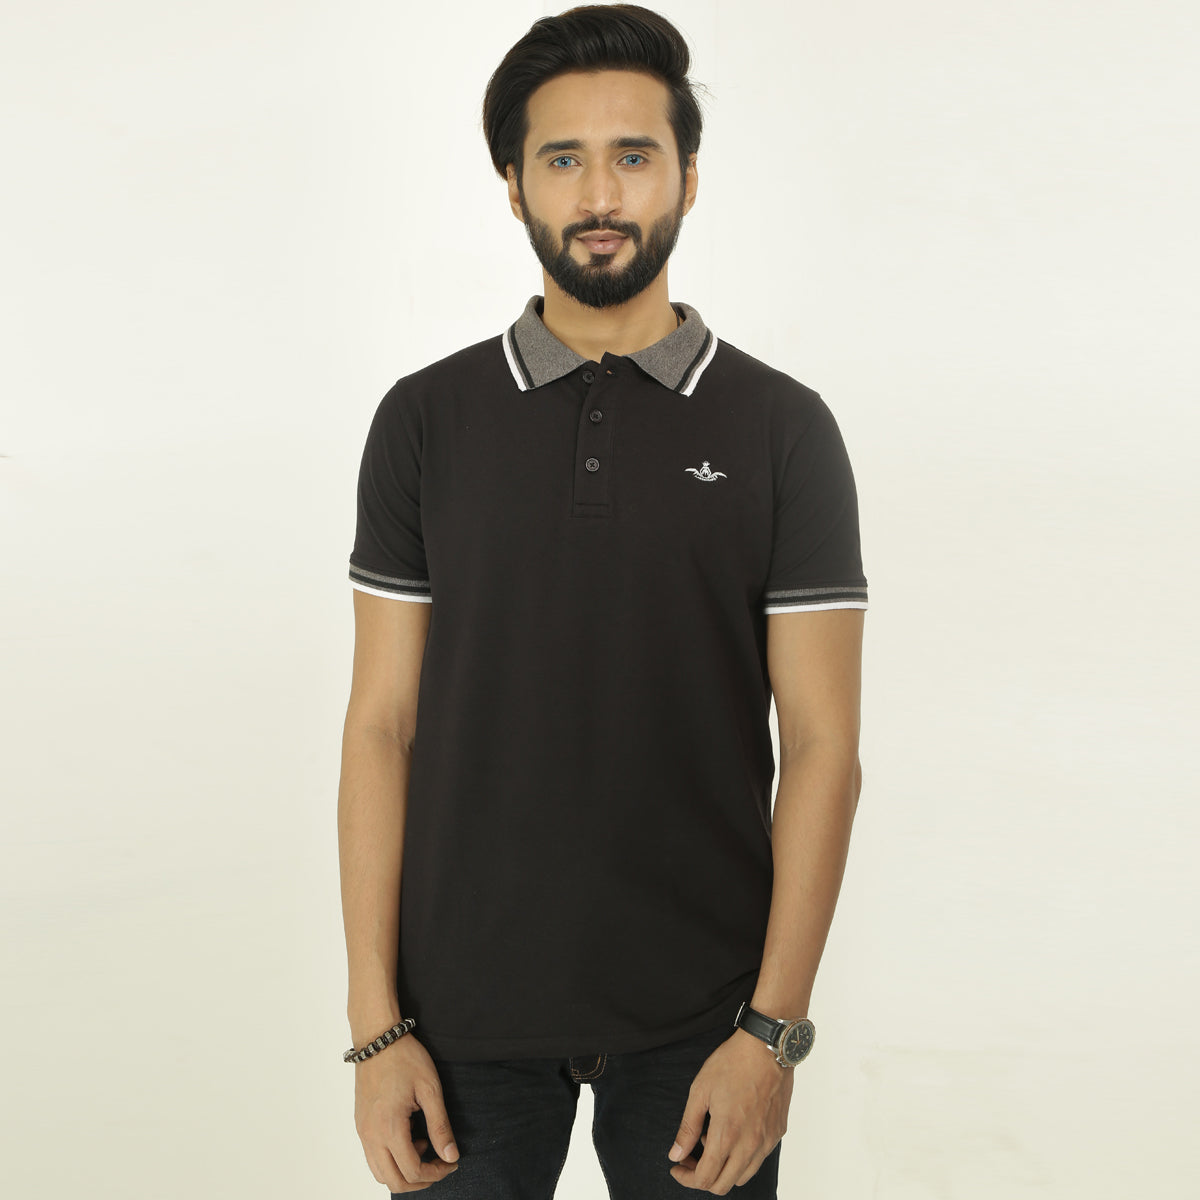 Tipping polo- Black - Masculine